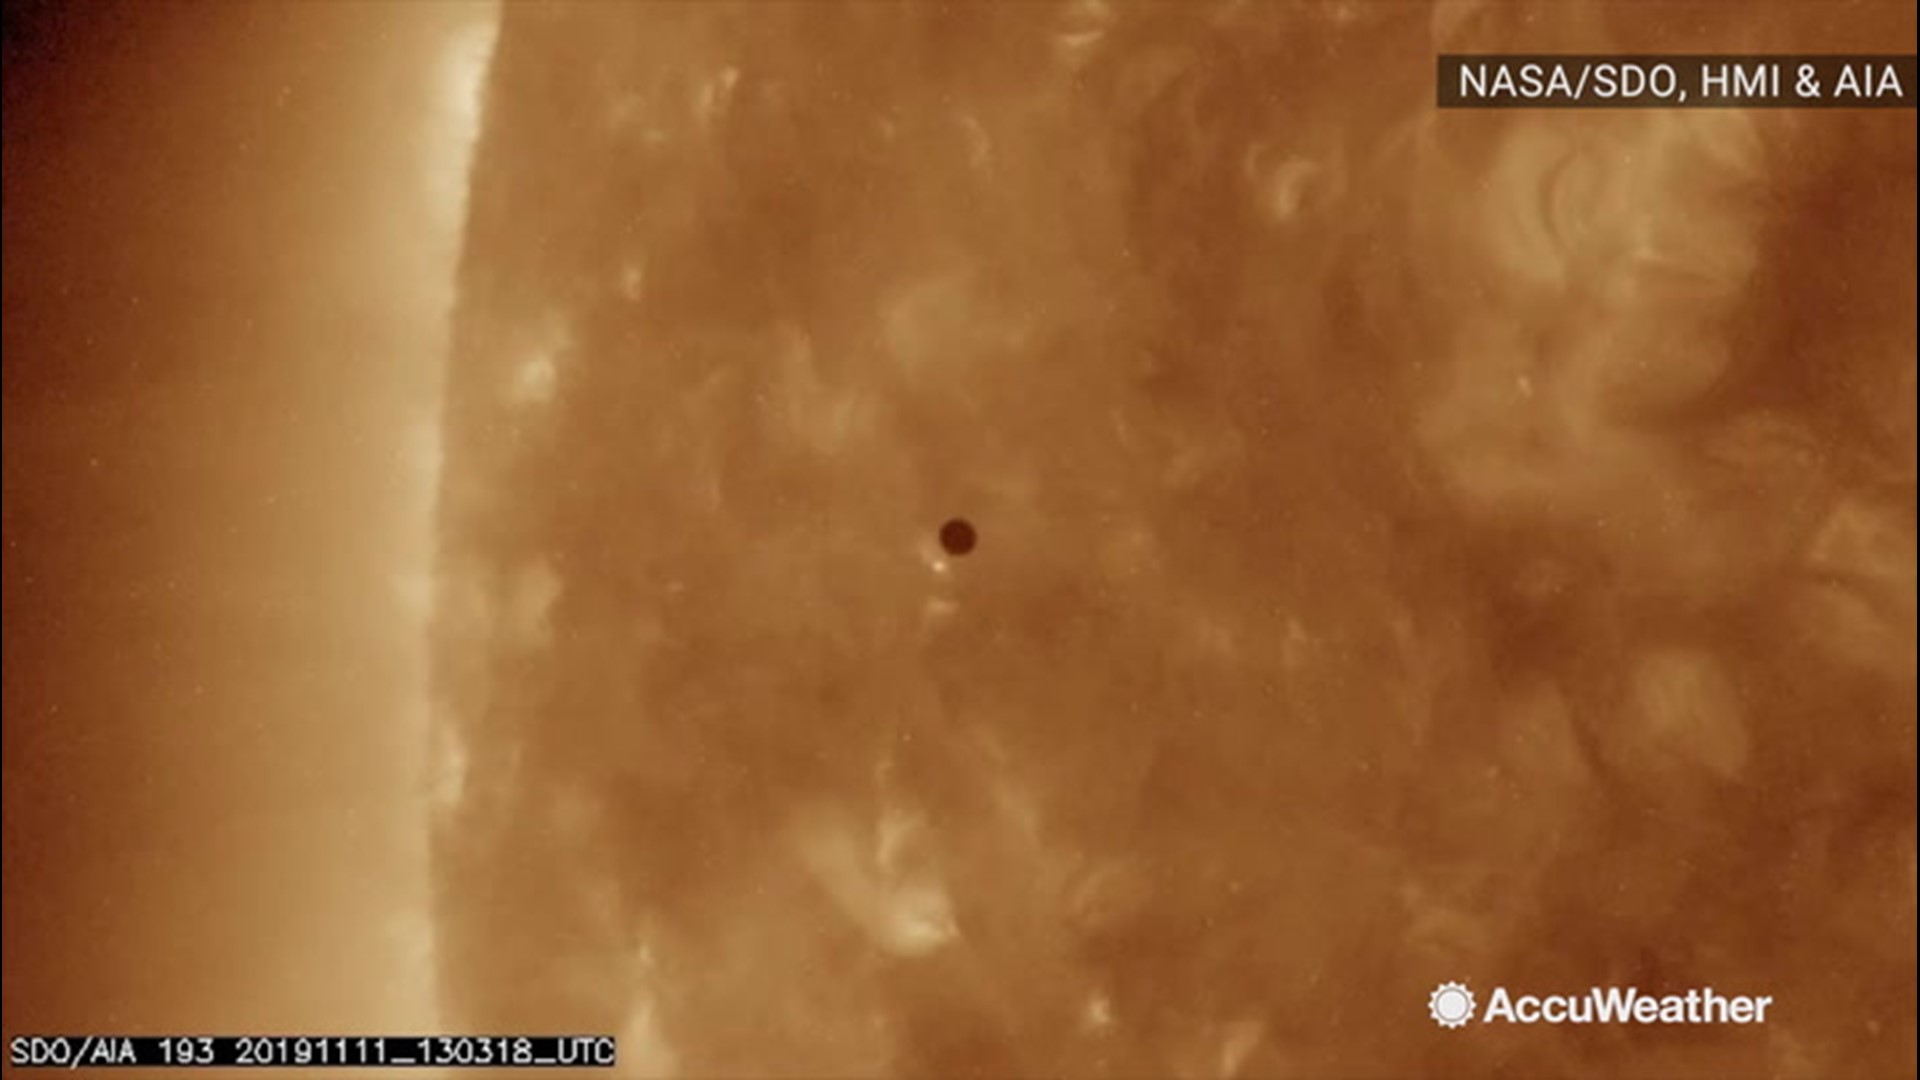 On Monday, Nov. 11, Mercury passed directly in-between the Earth and the sun in a rare event known as a transit. This is the last Mercury transit until 2032.